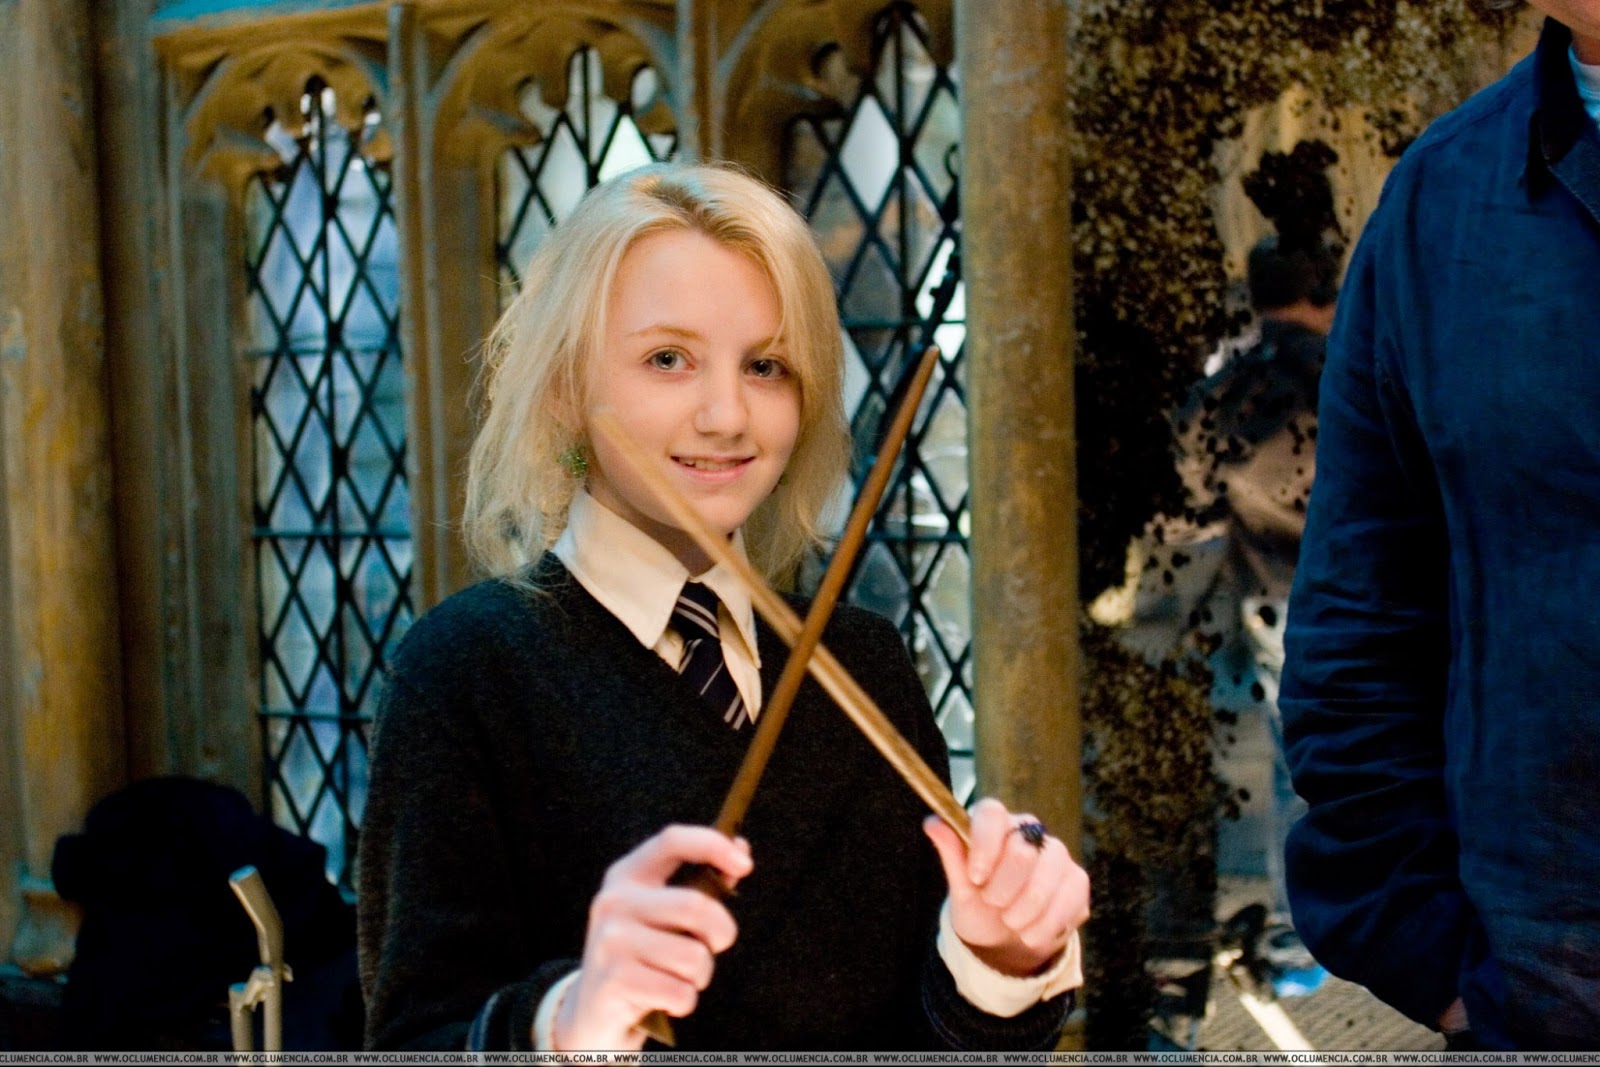 Harry Potter and the Order of the Phoenix - Movies Maniac1600 x 1067